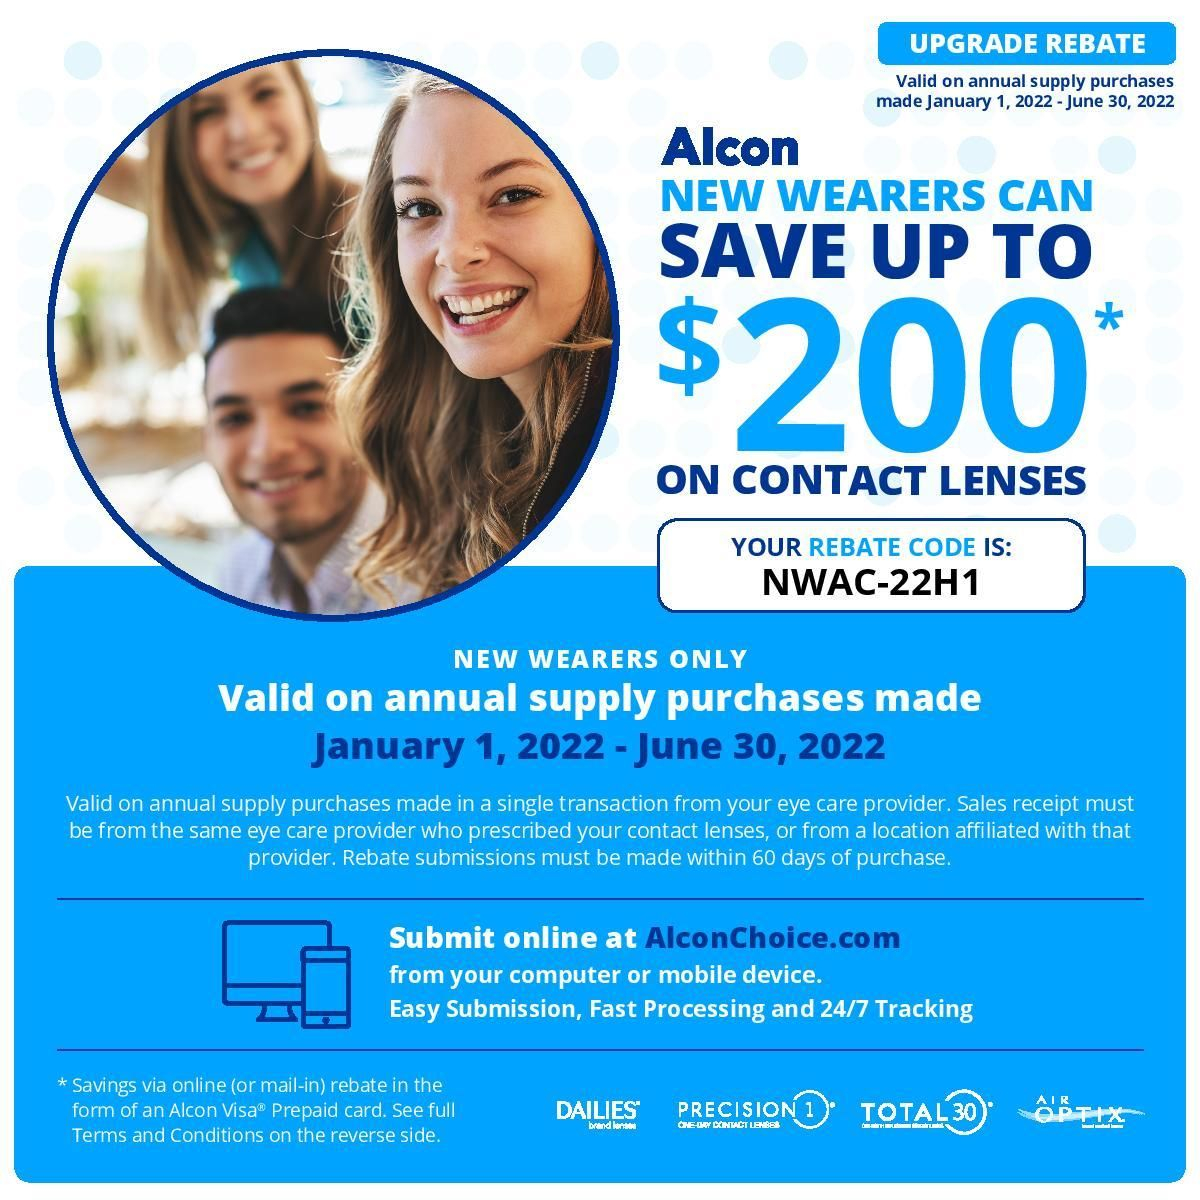 save-up-to-300-on-your-alcon-contact-lens-purchase